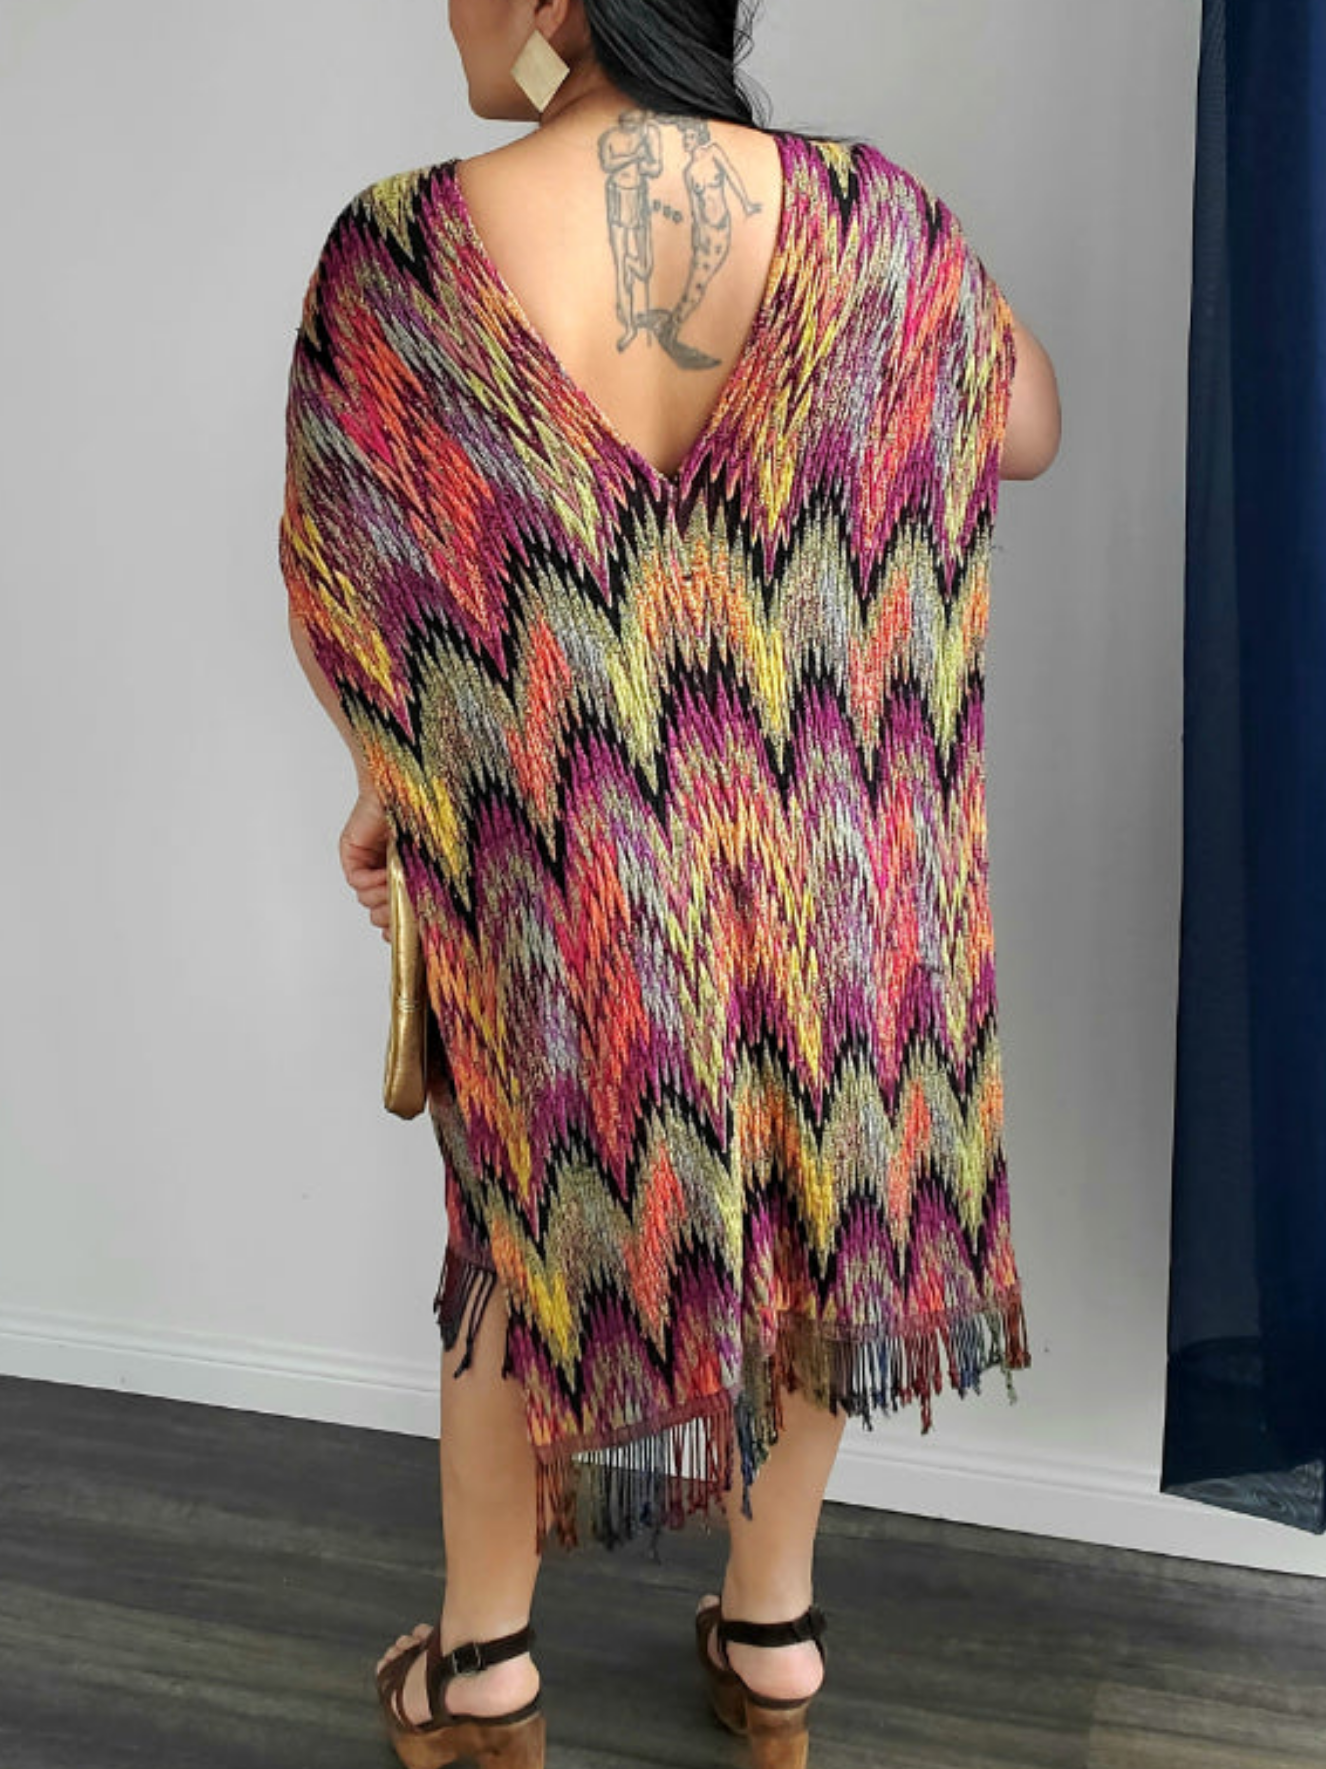 CM Colourful Scarf Dress - 1of1